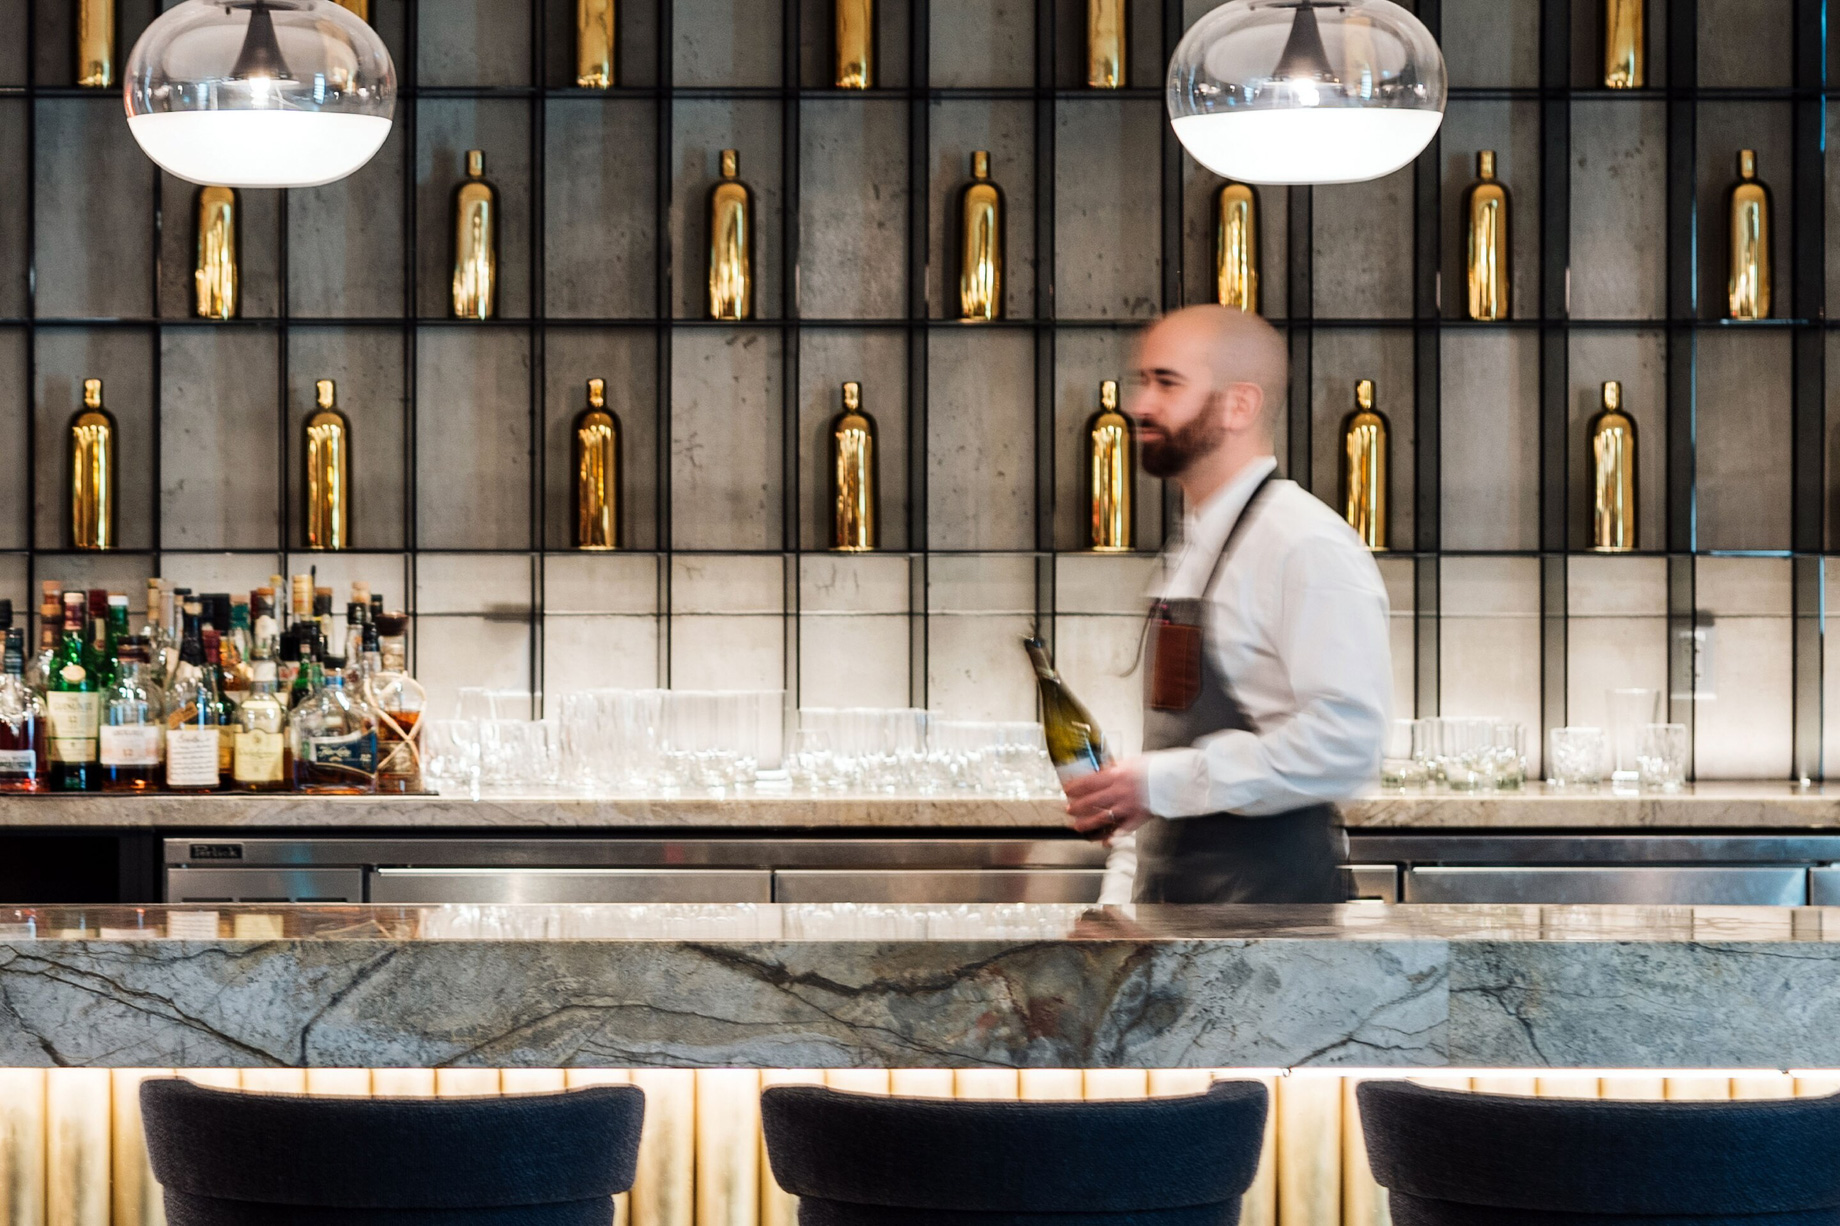 W Montreal Hotel – Montreal, Quebec, Canada – TBSP Sommelier